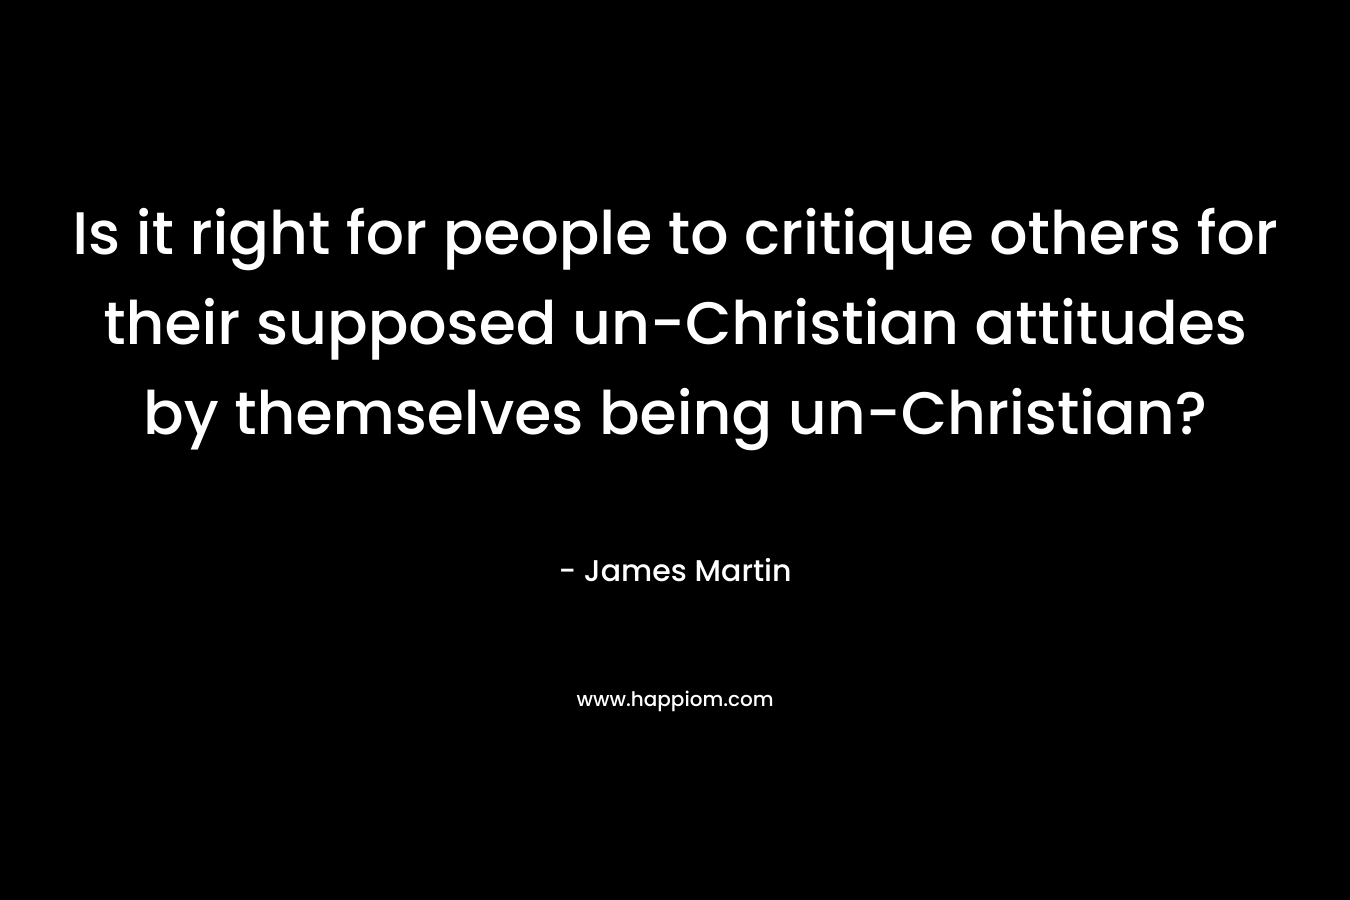 Is it right for people to critique others for their supposed un-Christian attitudes by themselves being un-Christian? – James Martin